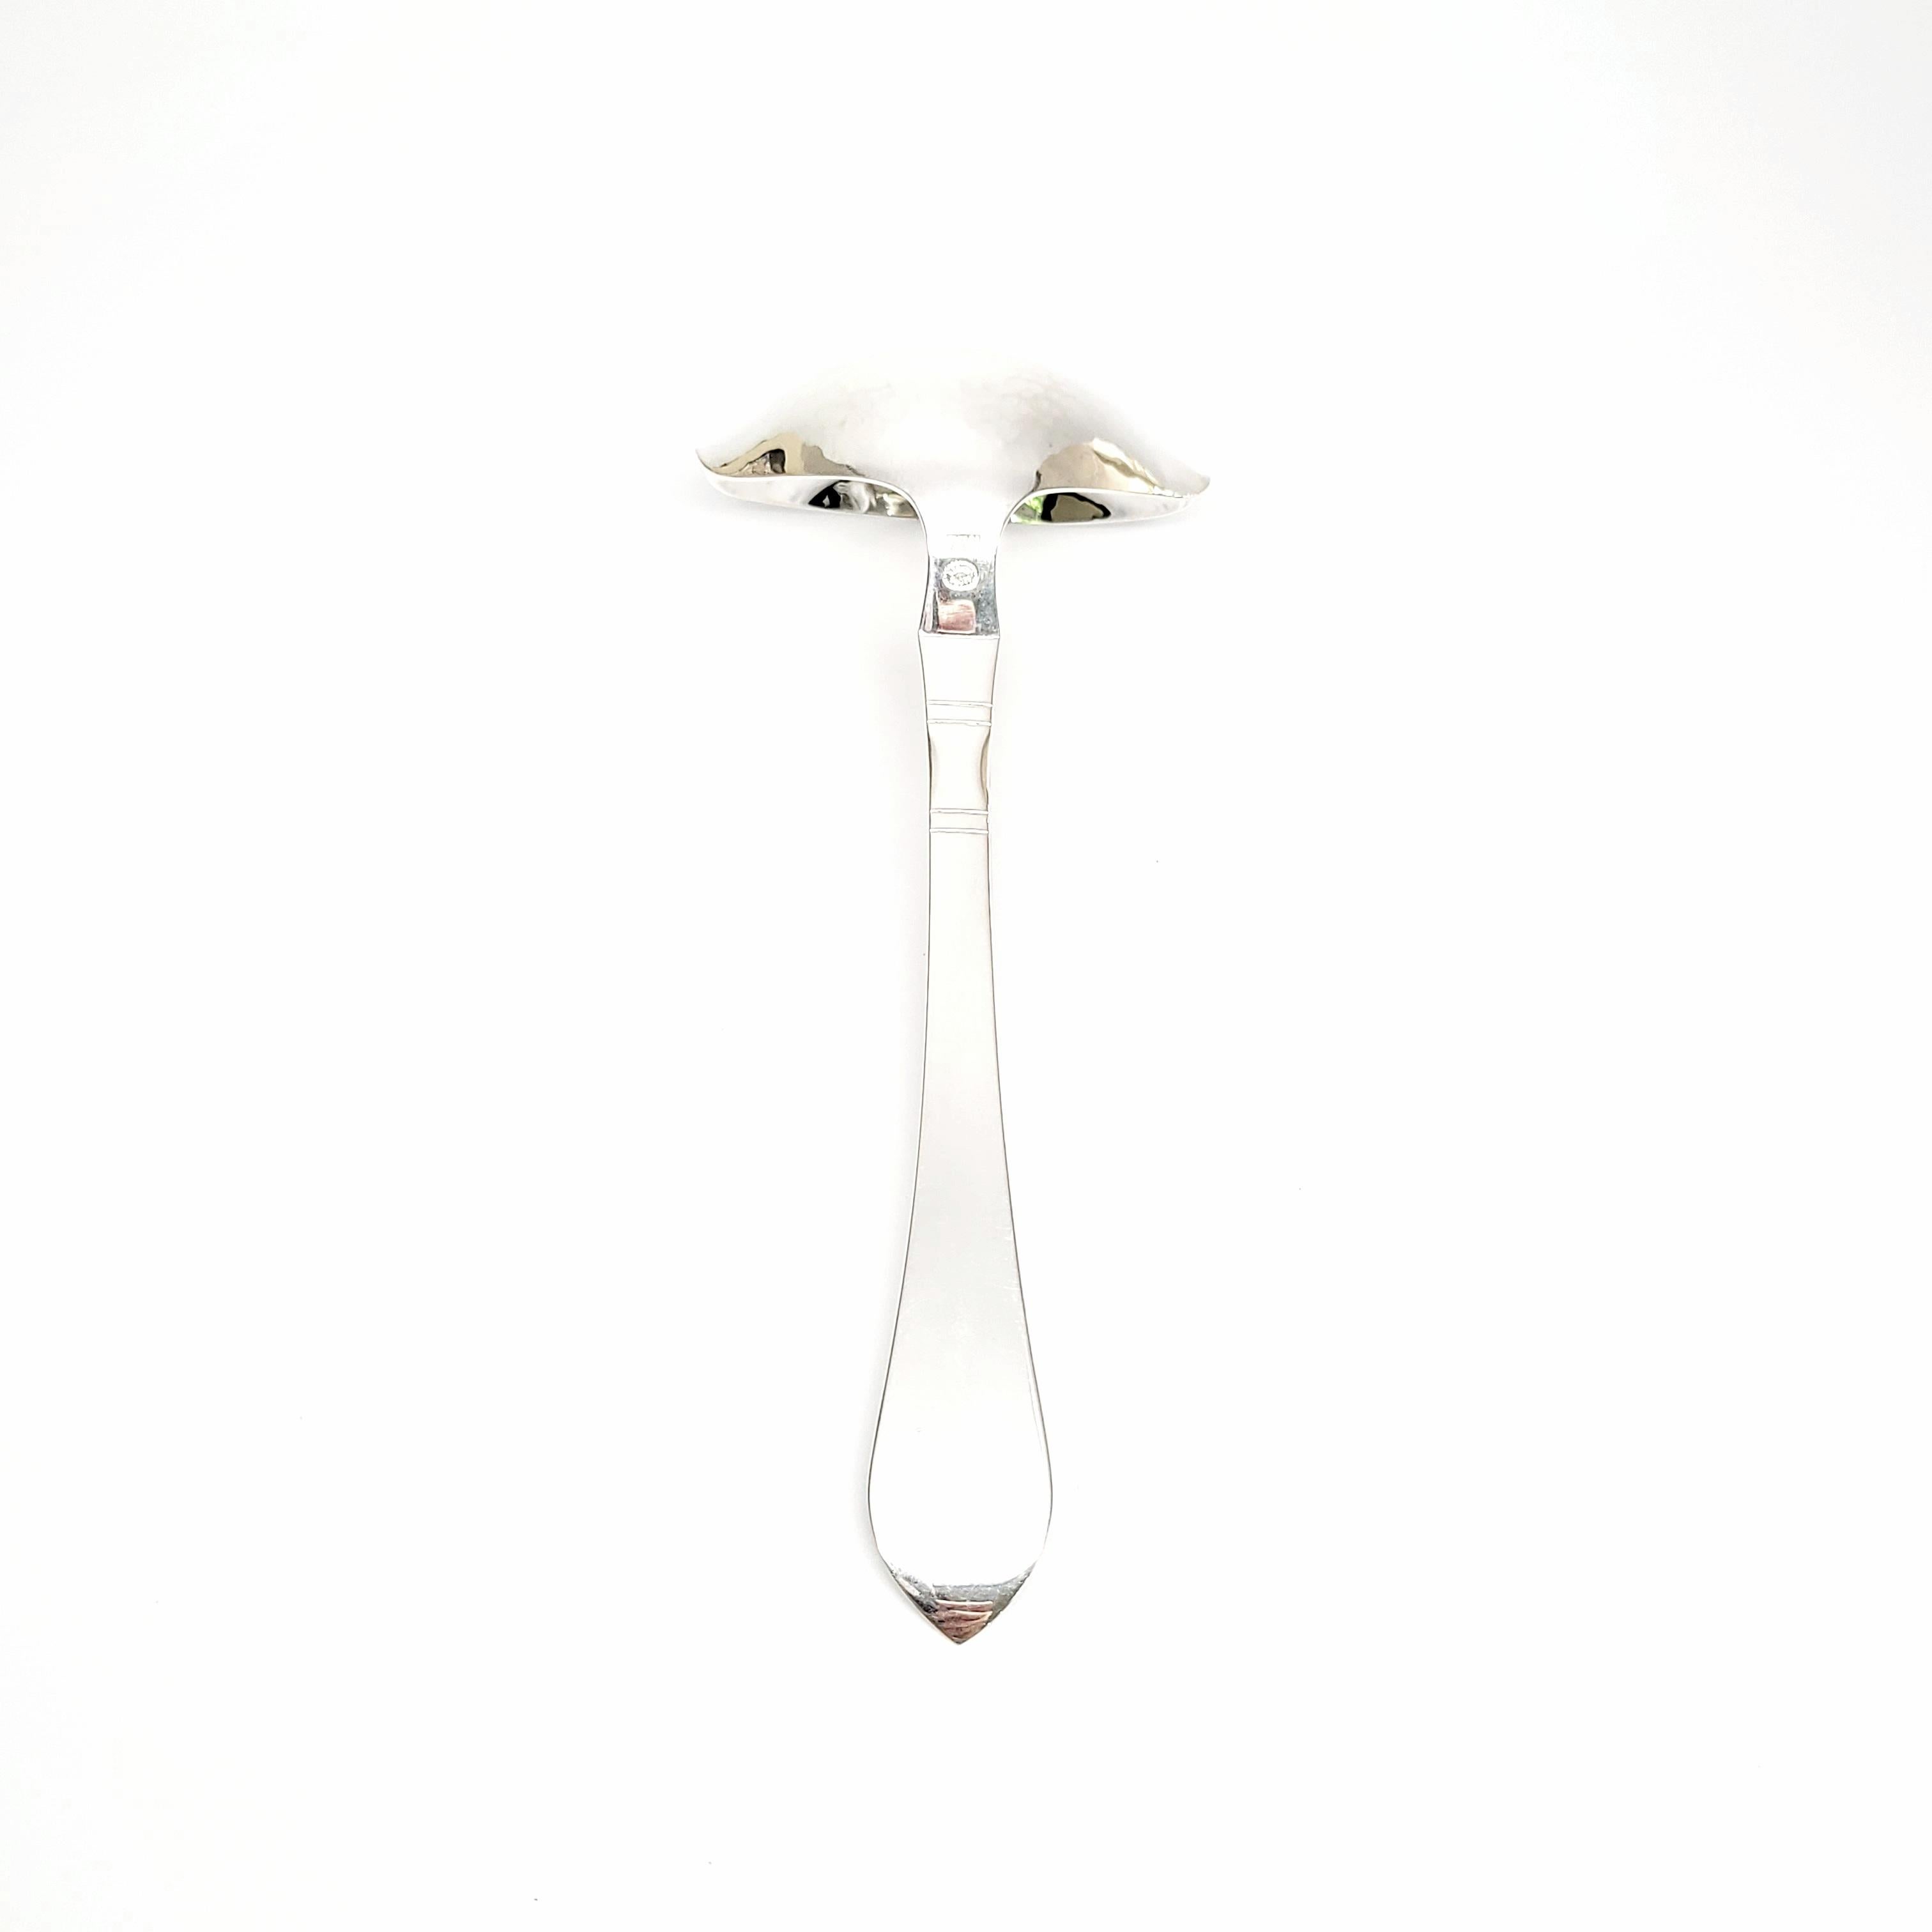 Georg Jensen Denmark sterling silver ladle in the Continental pattern.

The Continental pattern was designed in 1906 as the first major cutlery line from Georg Jensen. The pattern was inspired by traditional Nordic tools. This beautiful ladle is